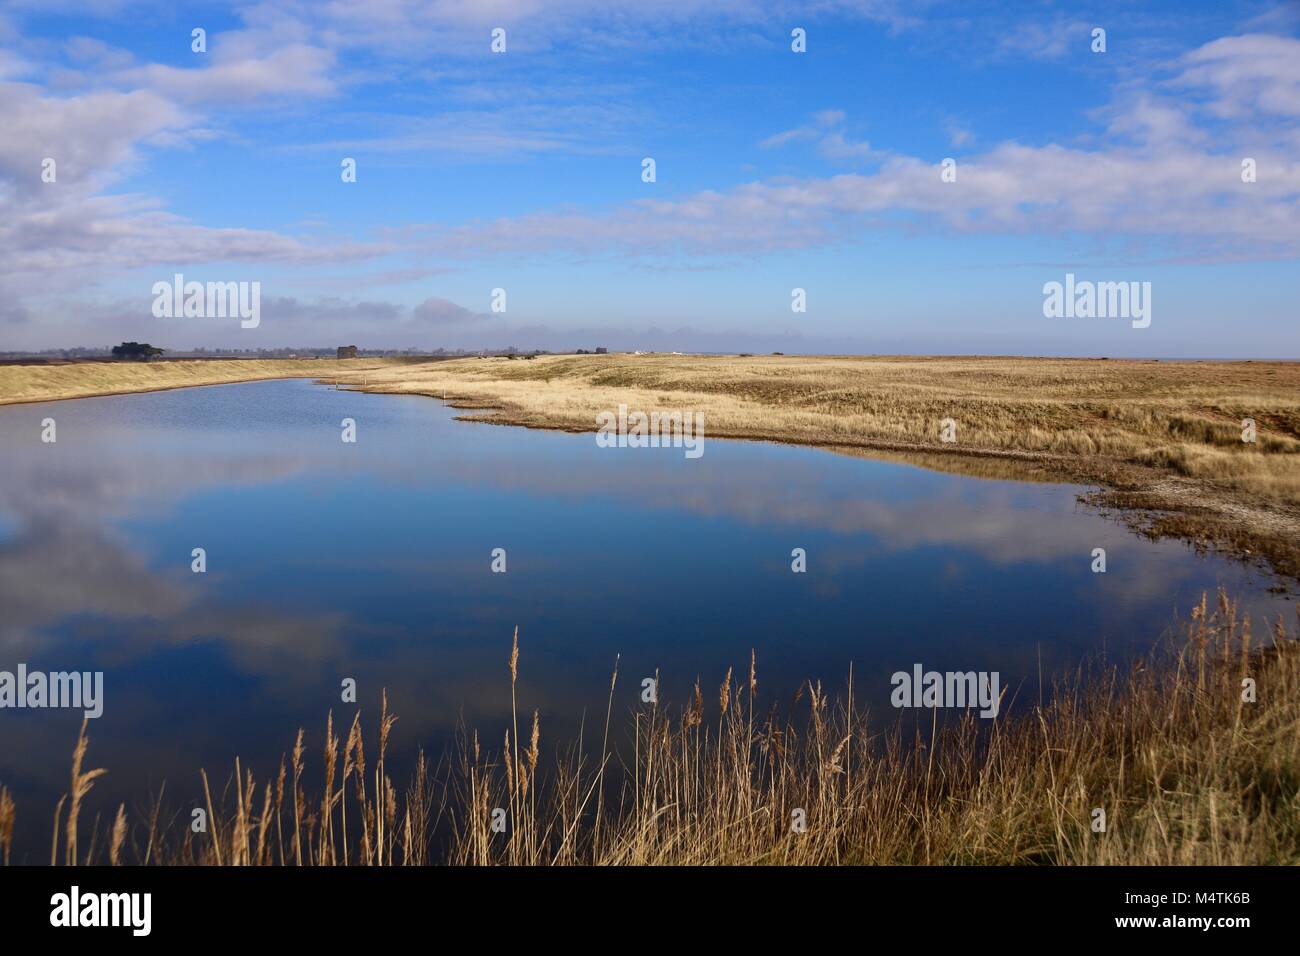 Golden banks around a reflecting lagoon by the North Sea at Bawdsey, Suffolk. Stock Photo